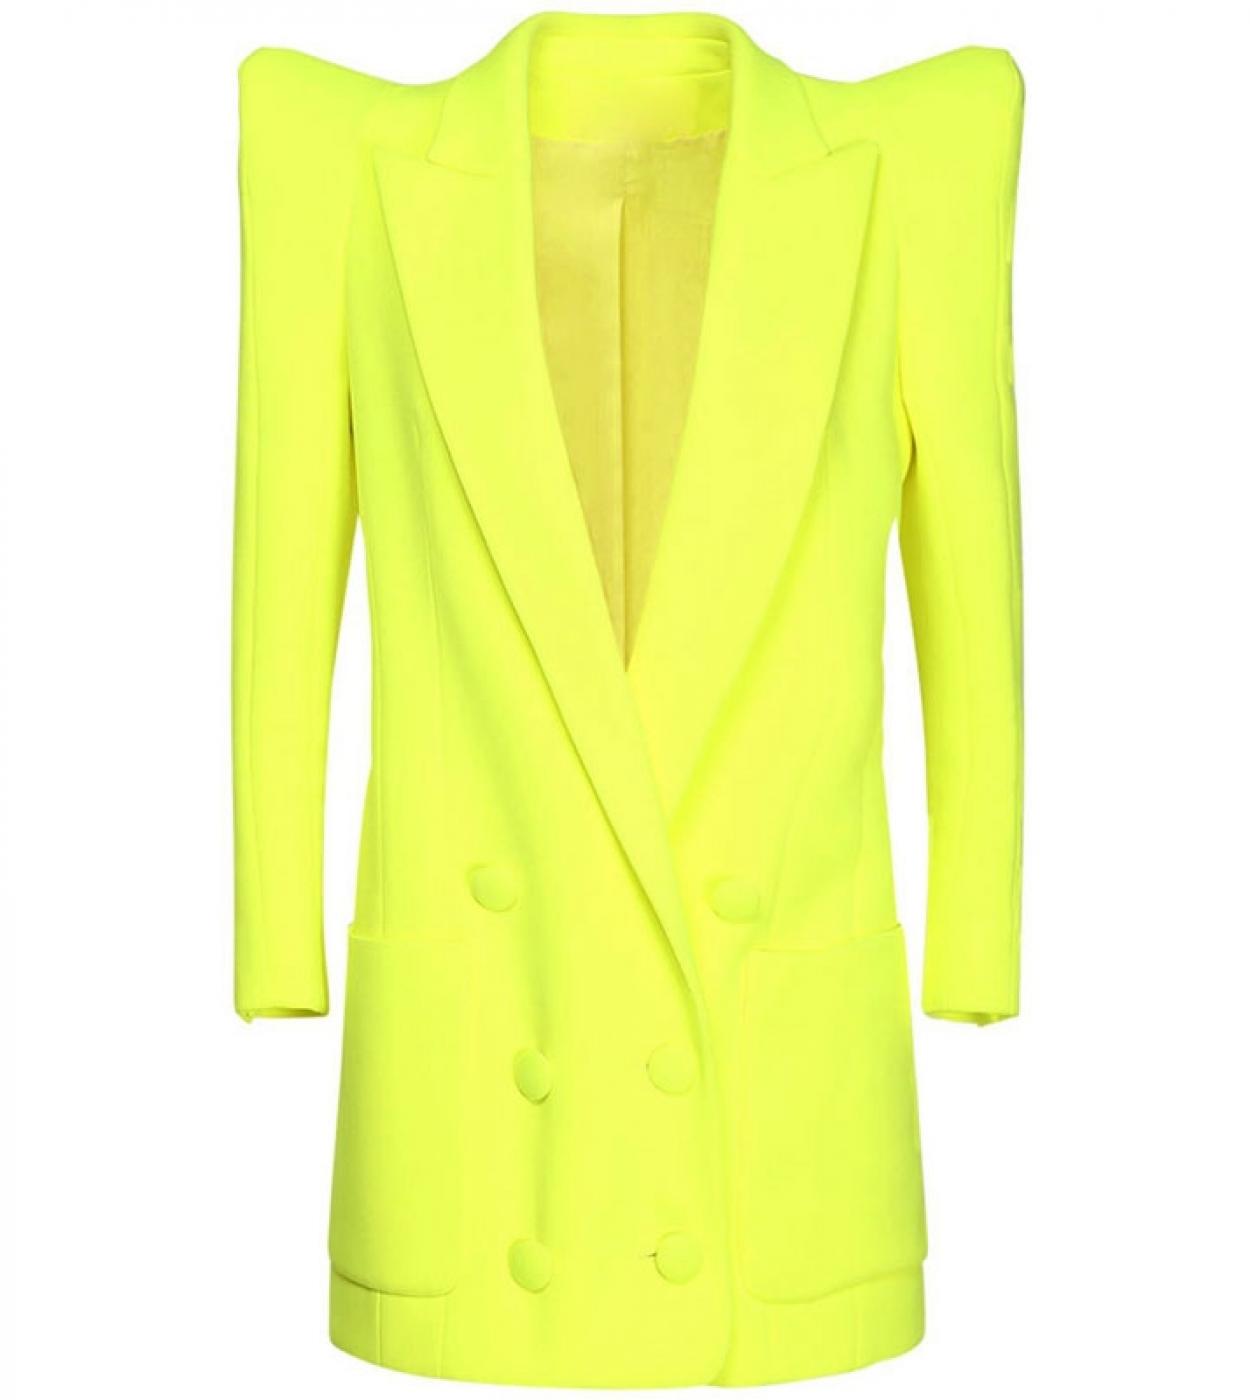 Yellow Suit Pants Female  Women Yellow Suits Piece  Yellow Suit Female Chic  Blazer  